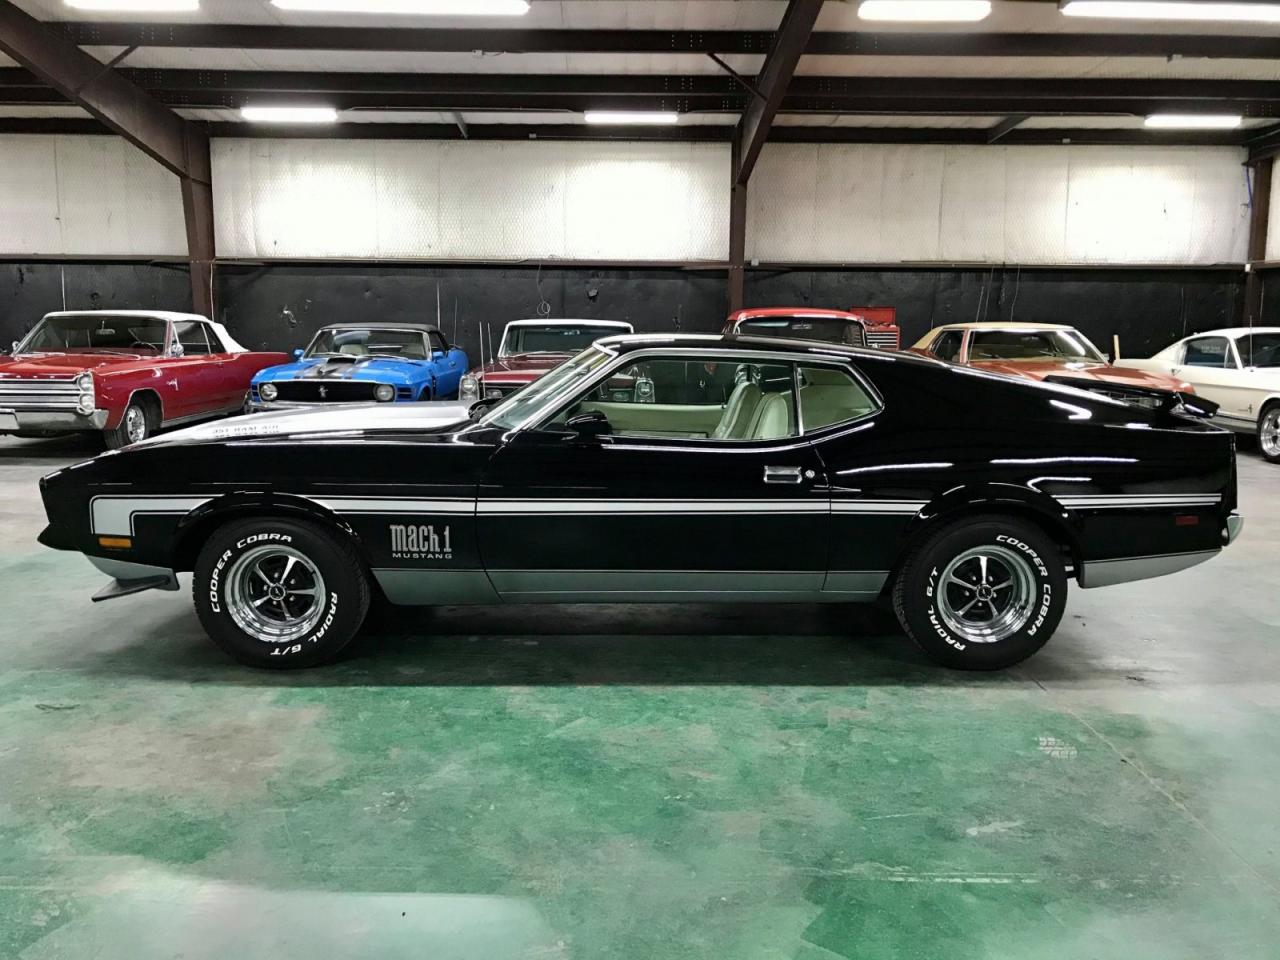 1972 Ford Mustang Mach 1 With 351-4V Cobra Jet Engine